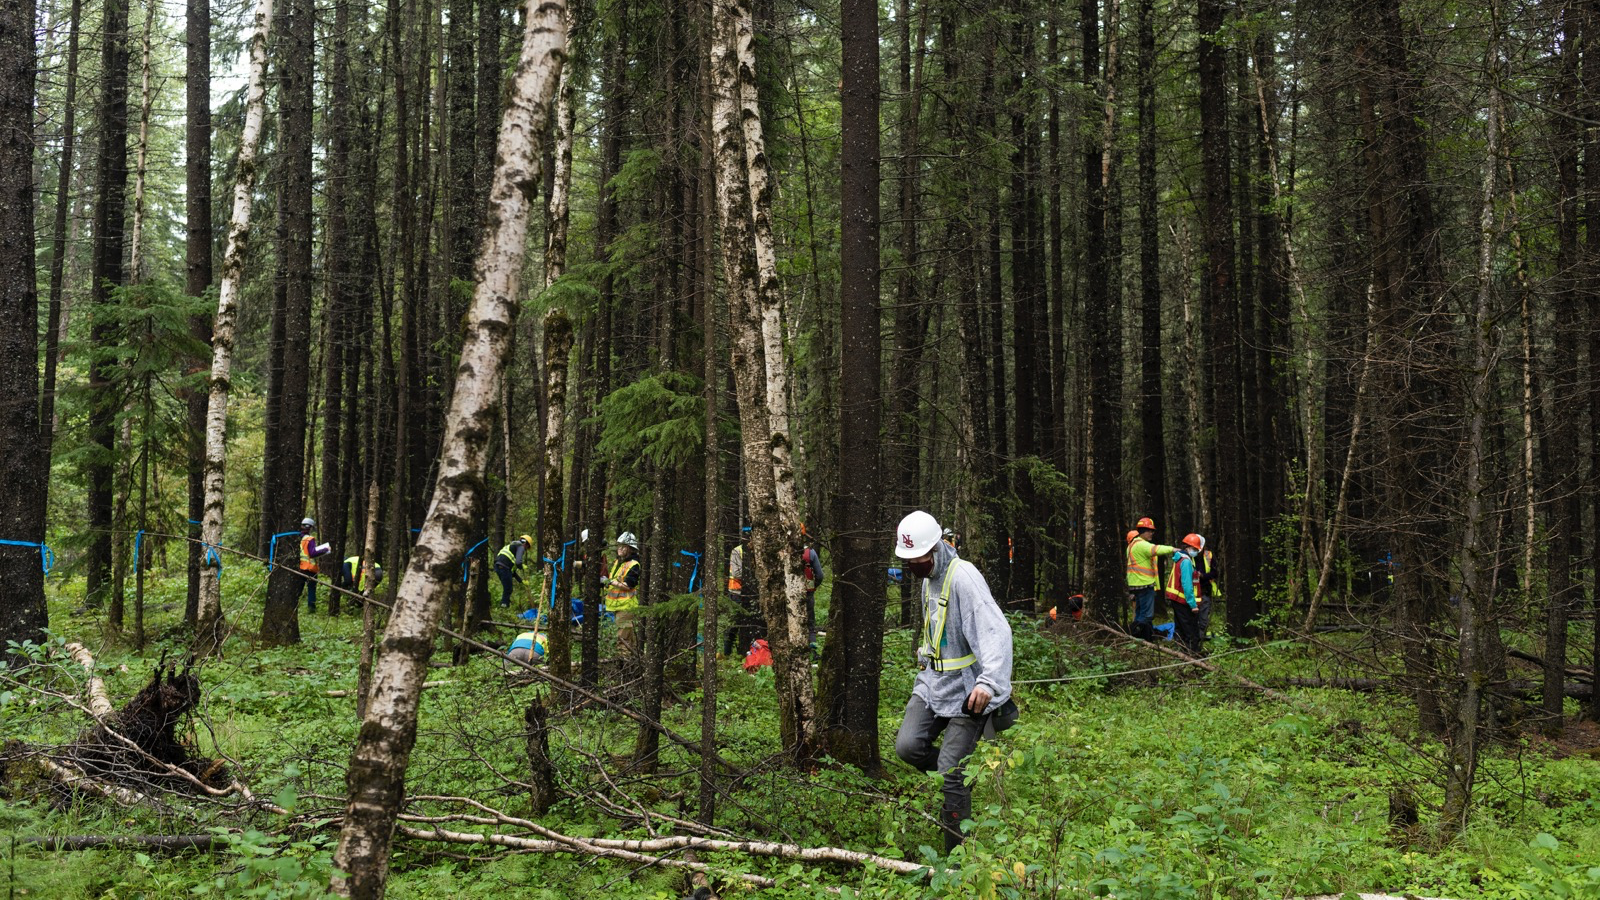 A few groups of researchers in a forest. They're wearing reflective safety clothing and hard hats.